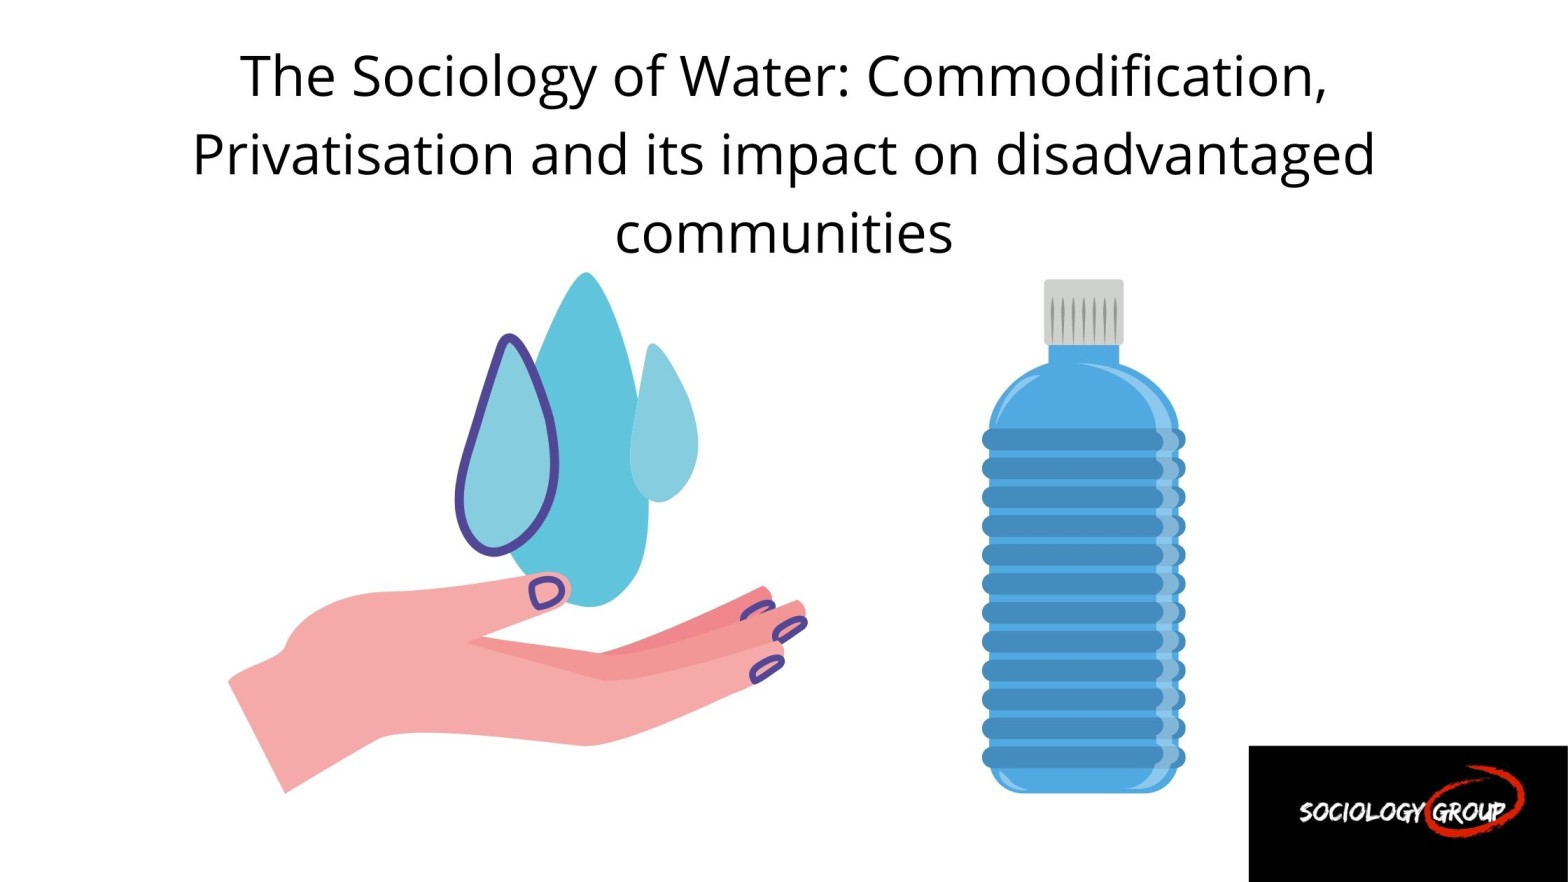 The Sociology of Water - Commodification, Privatisation and its impact on disadvantaged communities (1)